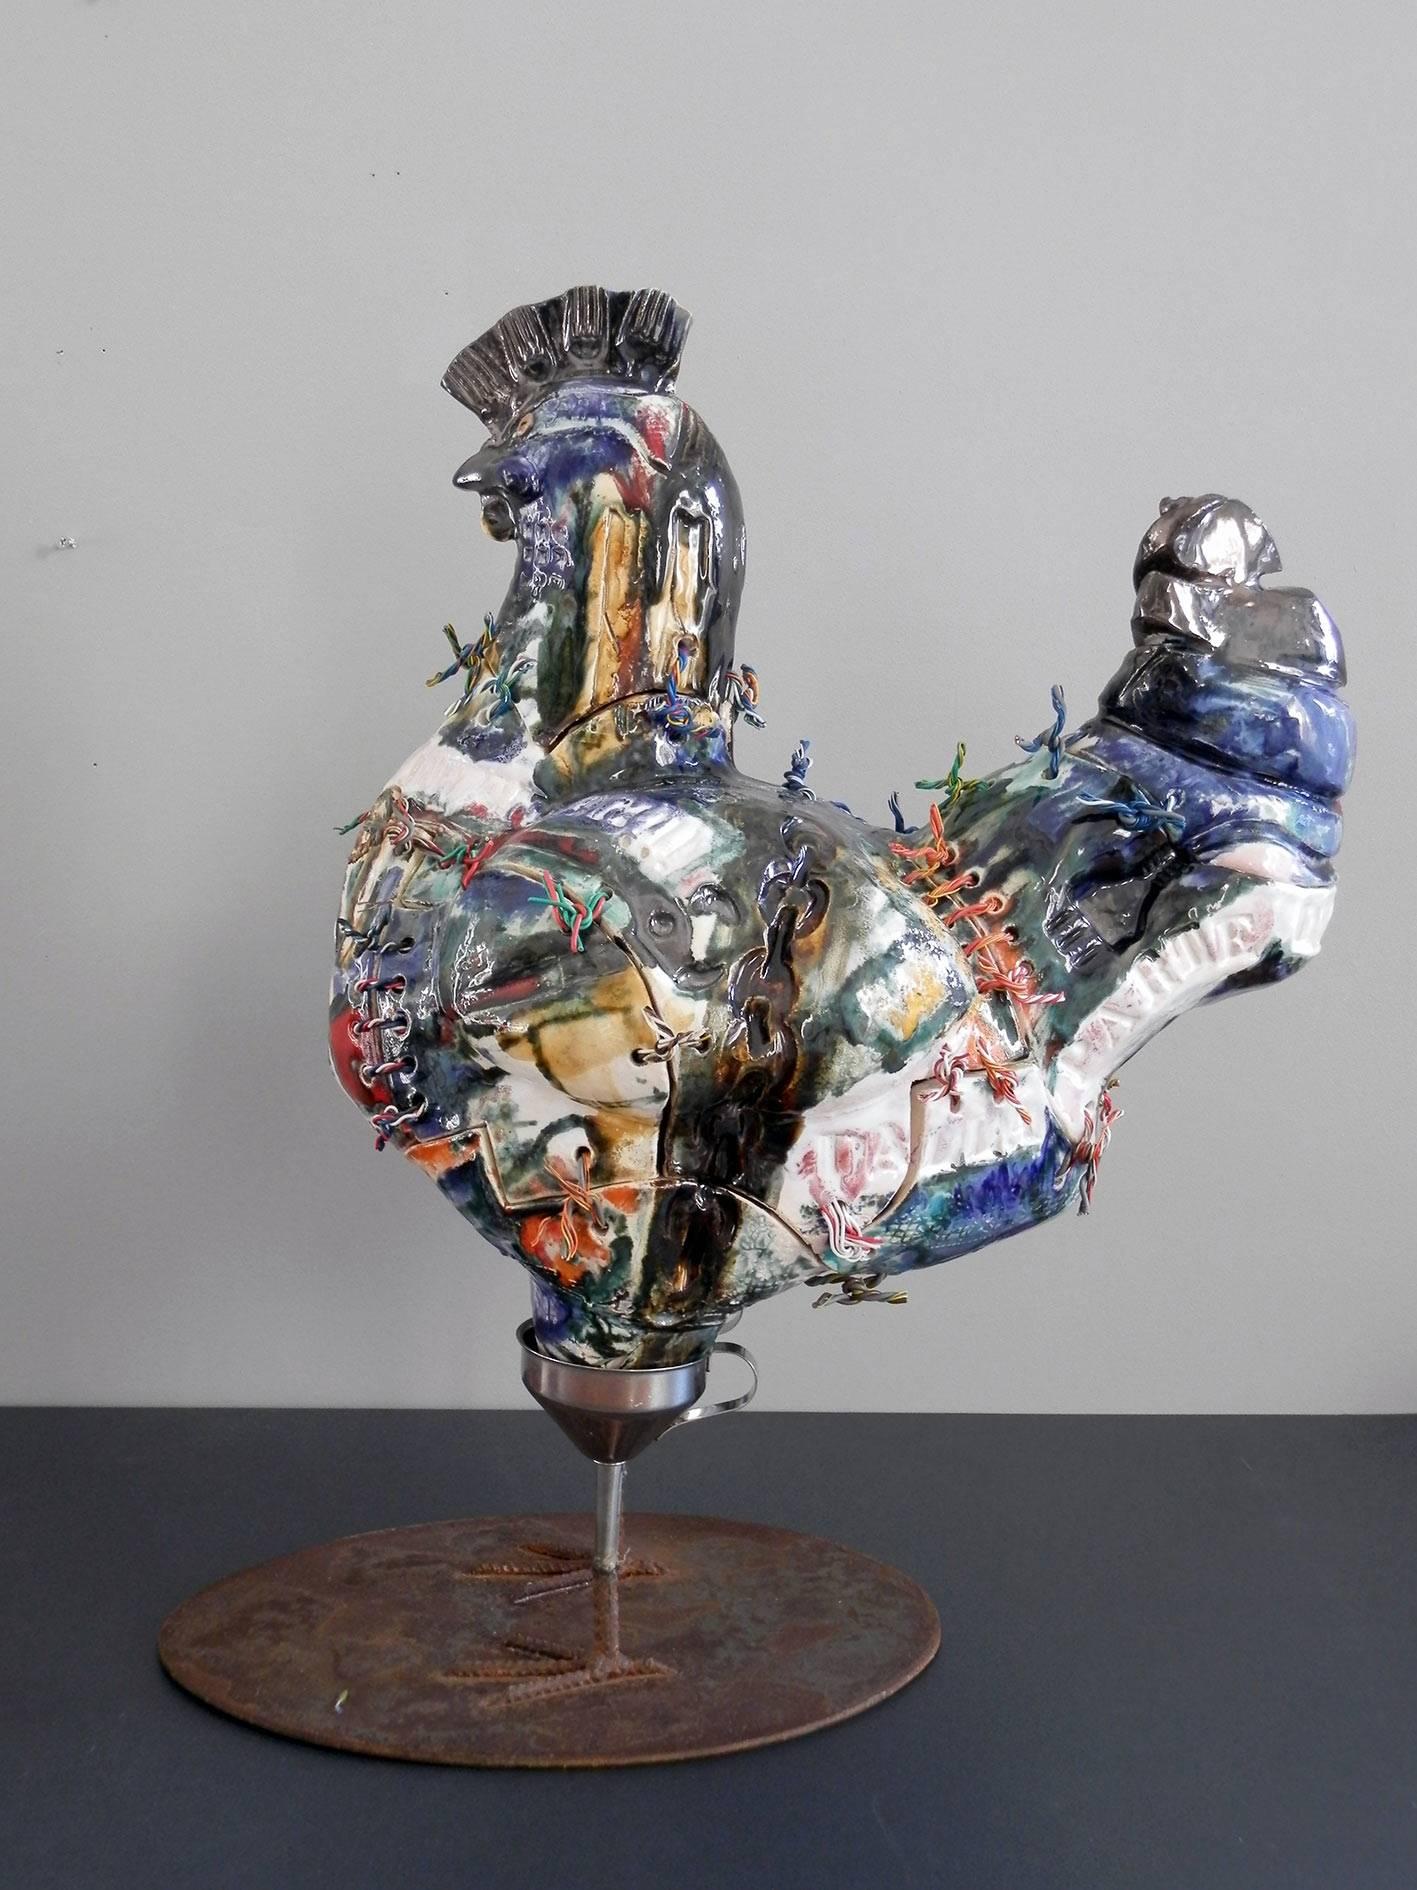 Those who are looking for an unusual and unique artwork cannot miss out this amazing and ironic ceramic sculpture.
Unique piece masterfully made by Italian artist and creator Roberta Colombo, this 60-cm-high hen sculpture has a body composed of